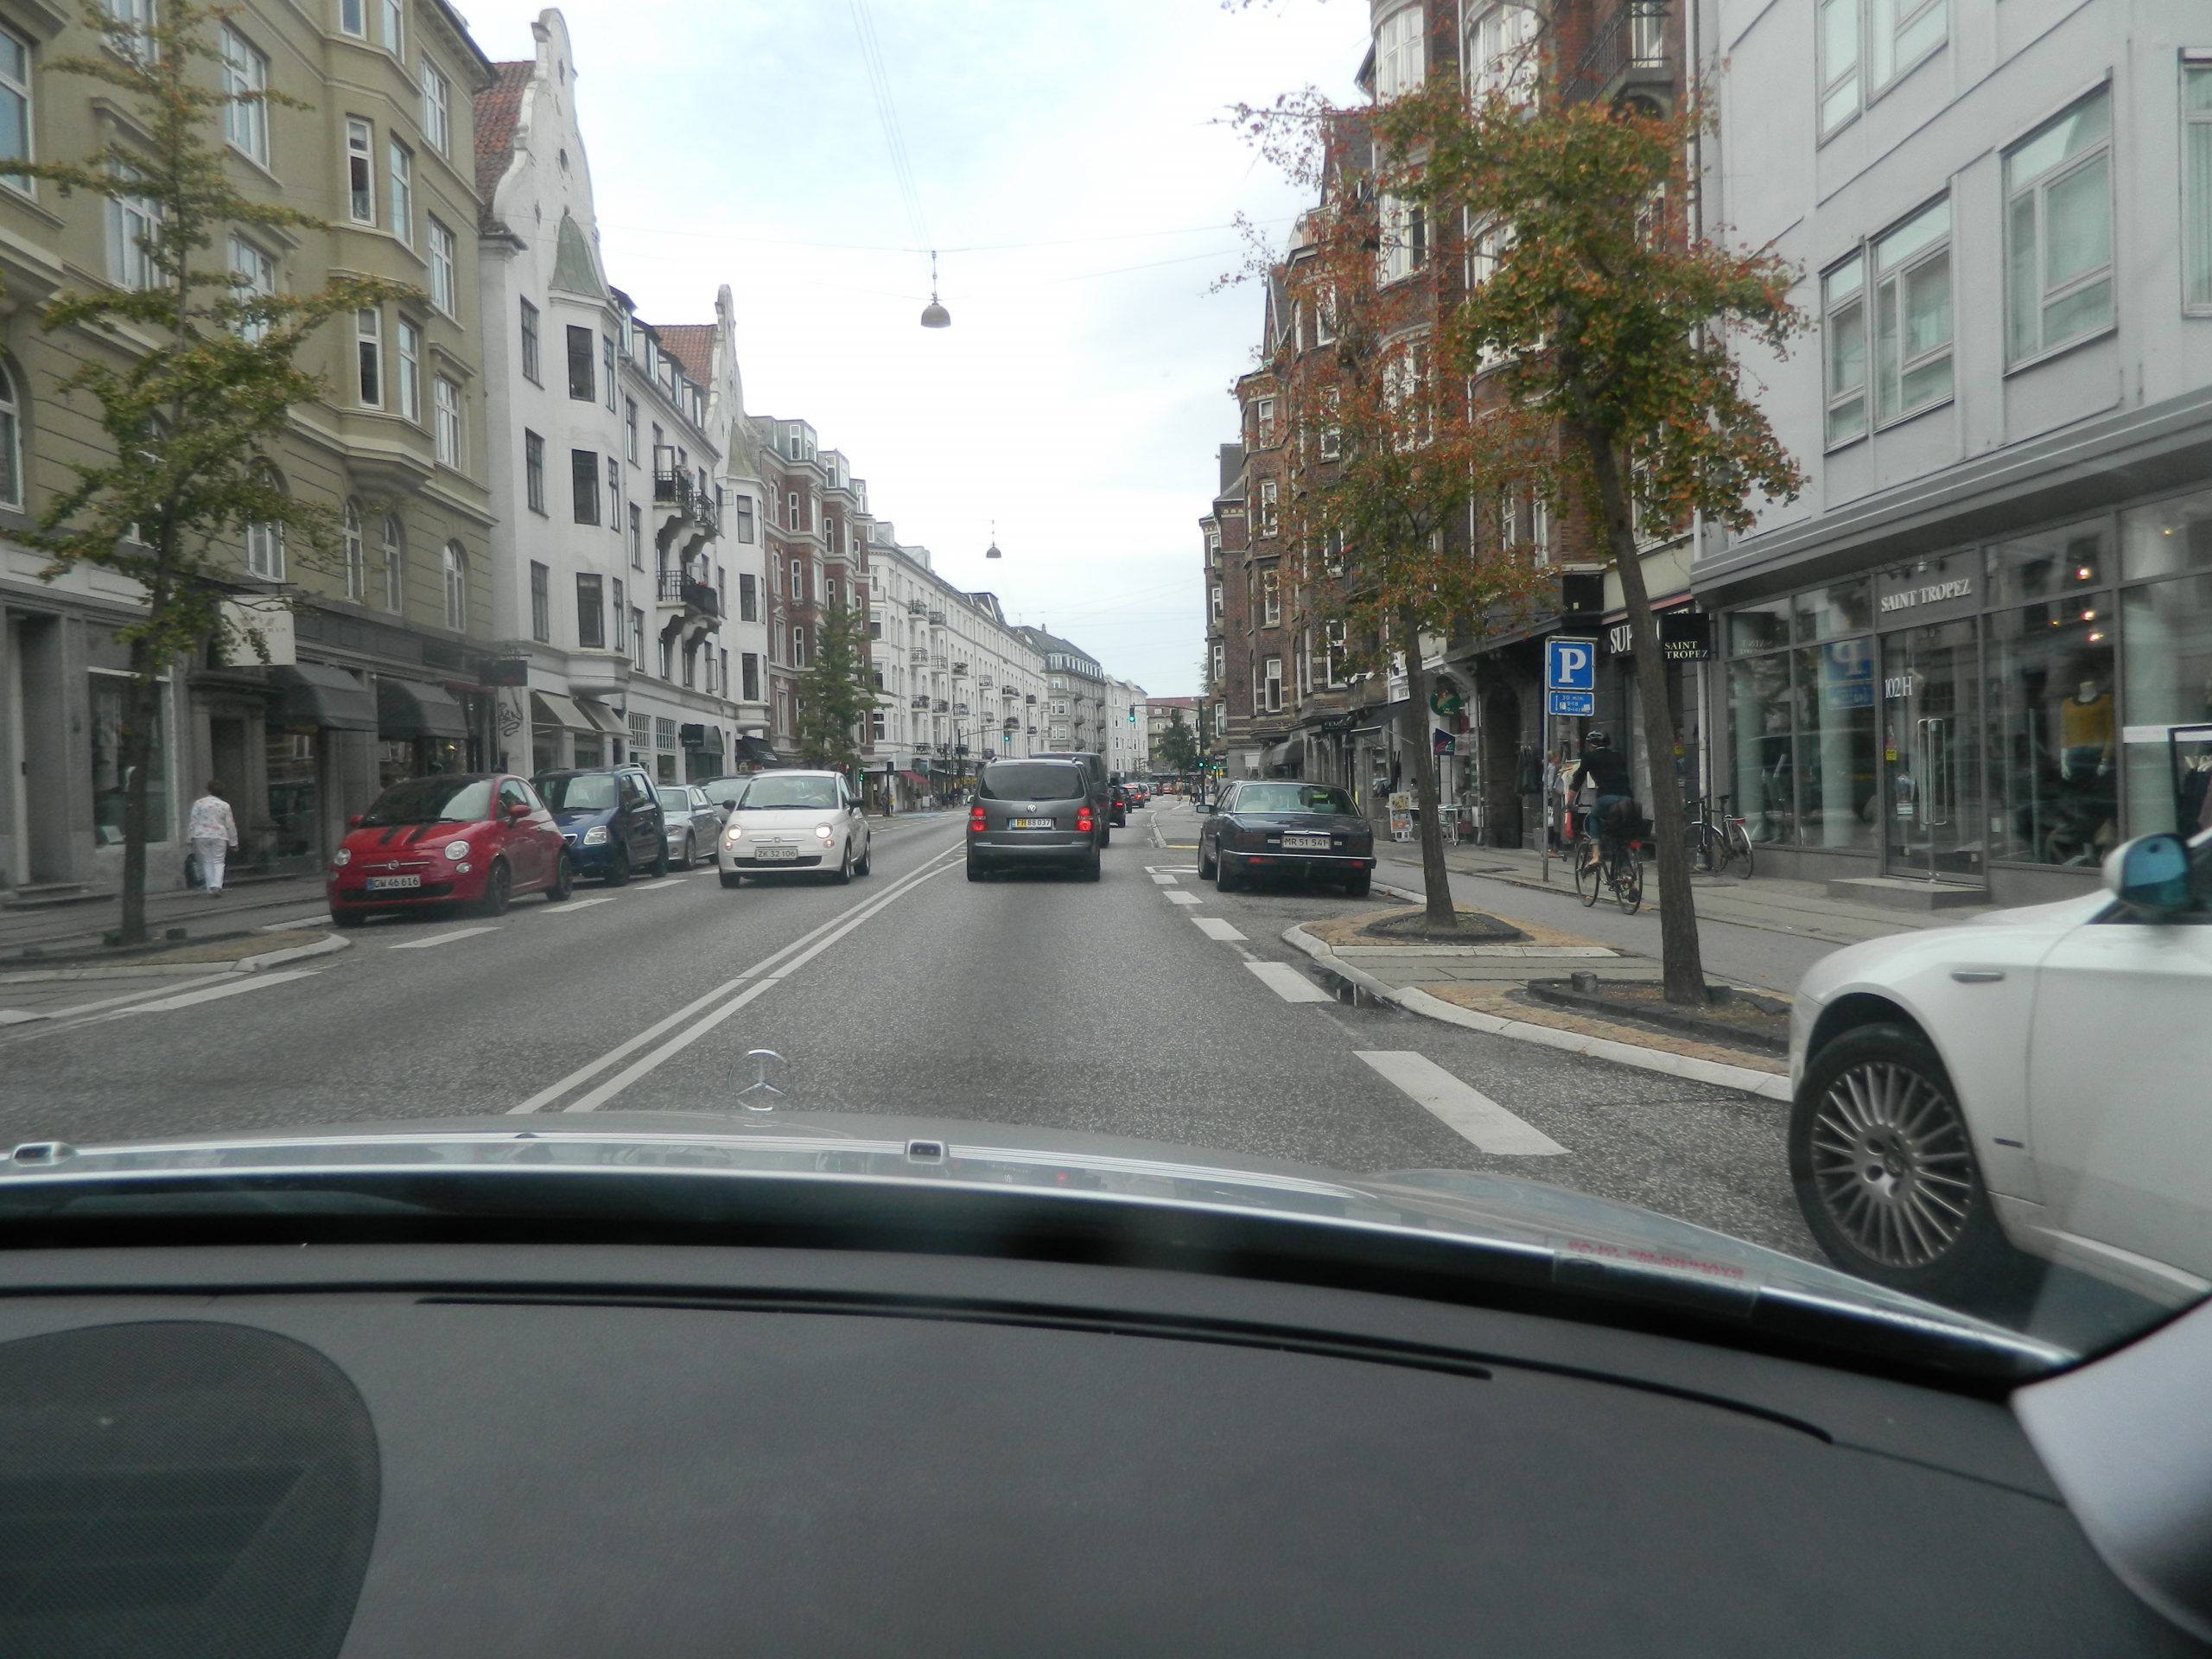 Local Round-Up: A few among the richest and poorest city districts in Copenhagen - The Copenhagen Post – The Copenhagen